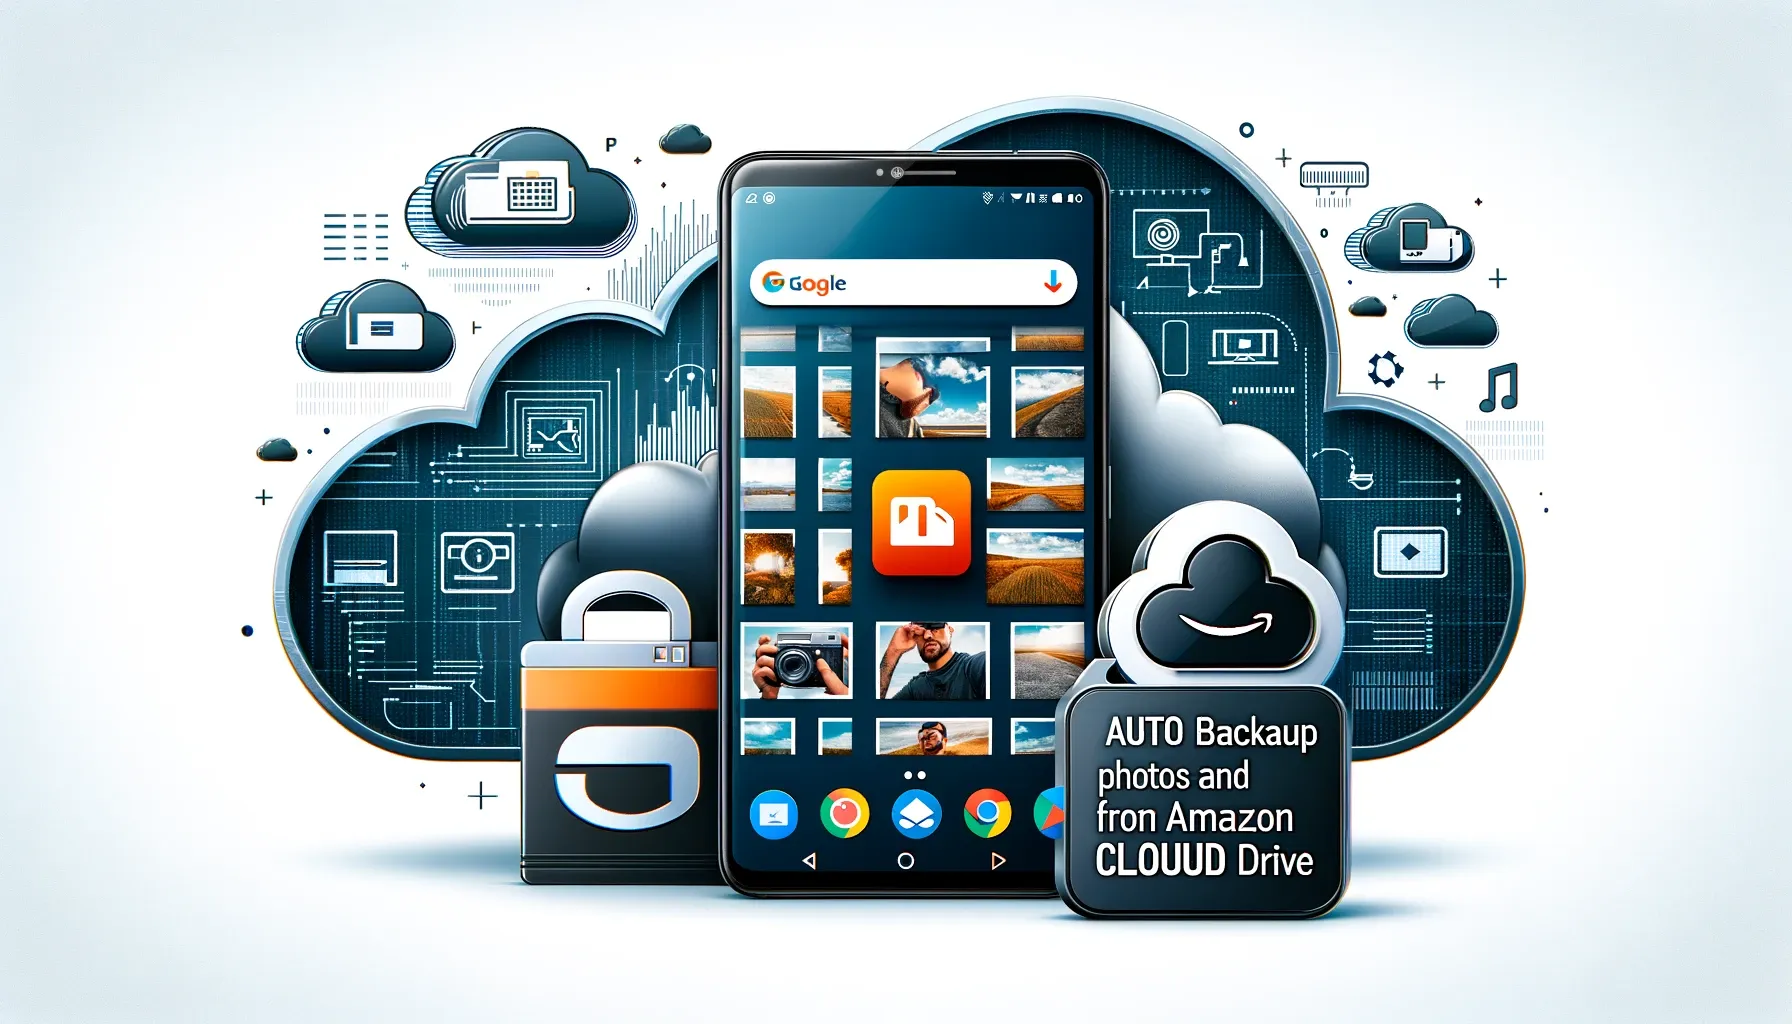 How to Auto Backup Photos and Videos from Android to Amazon Cloud Drive